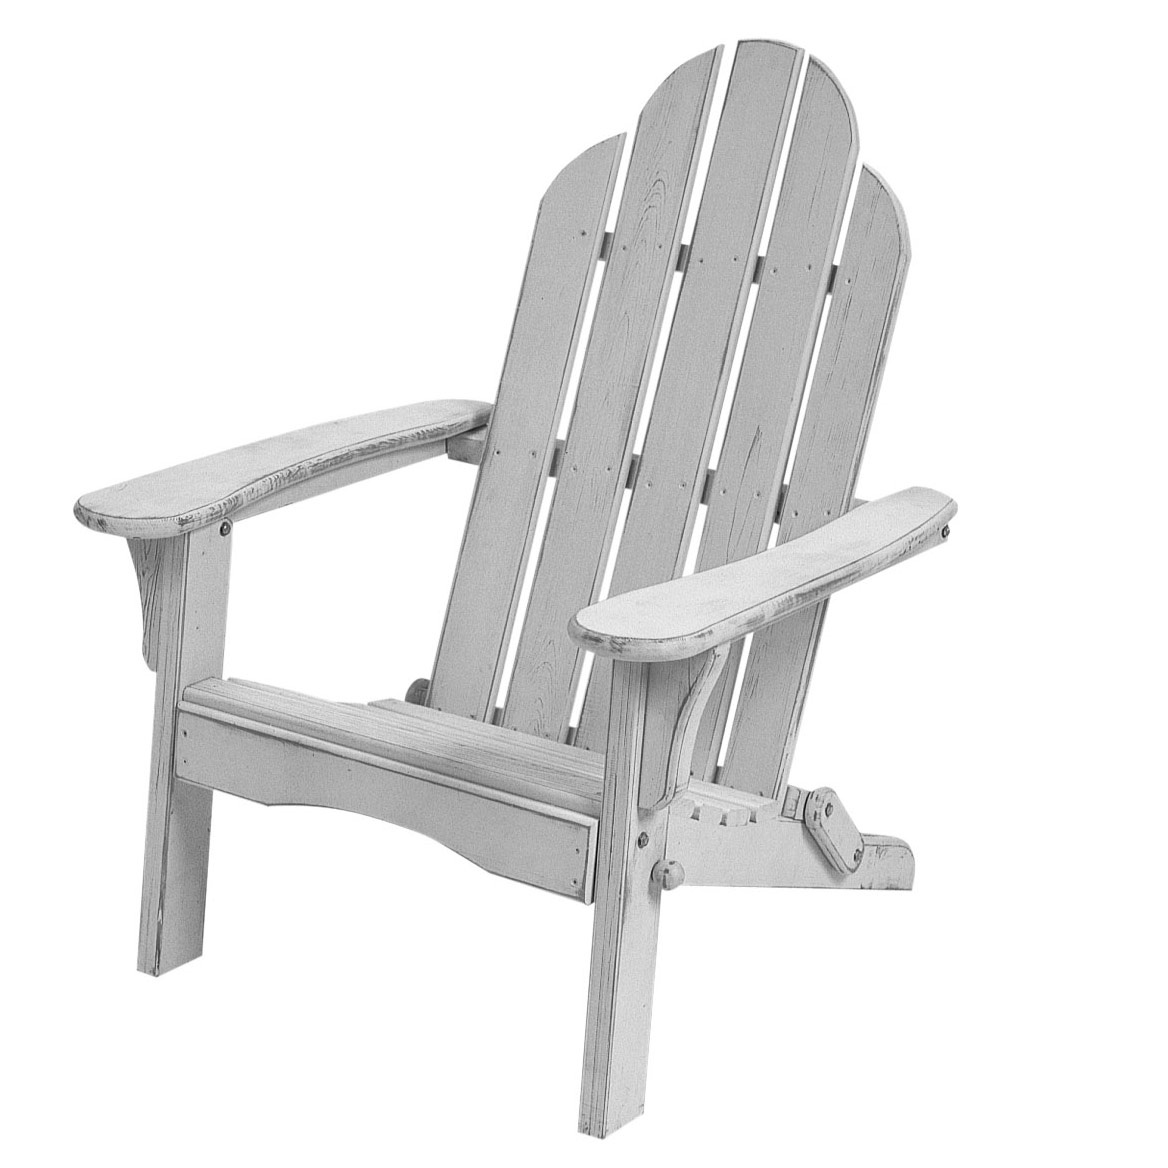 Adirondack Rocking Chairs Specs | Search Results | DIY Woodworking 